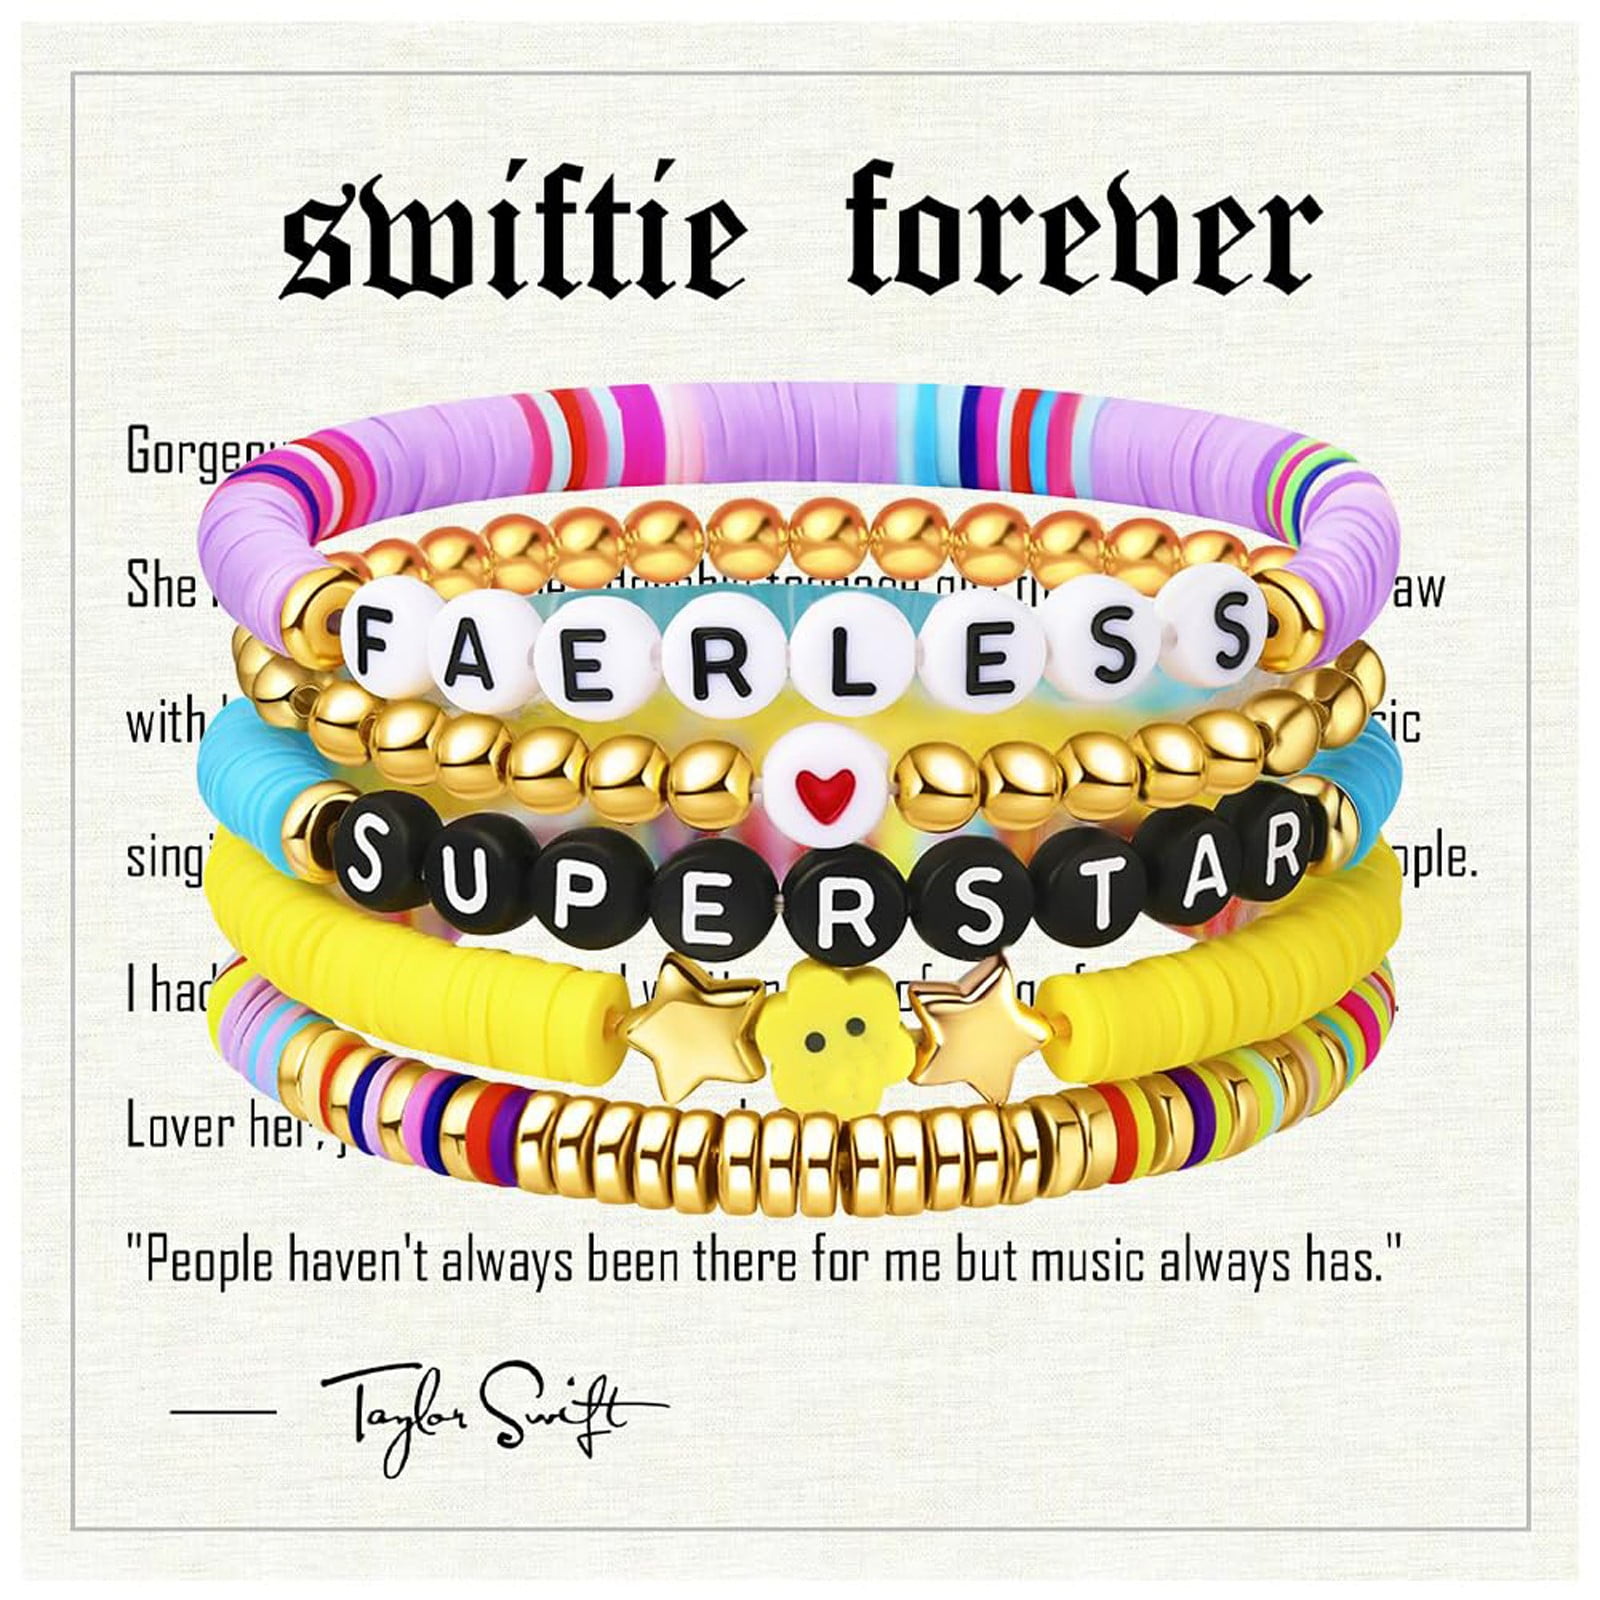 Shop Friendship Bracelet Taylor Swift Set with great discounts and